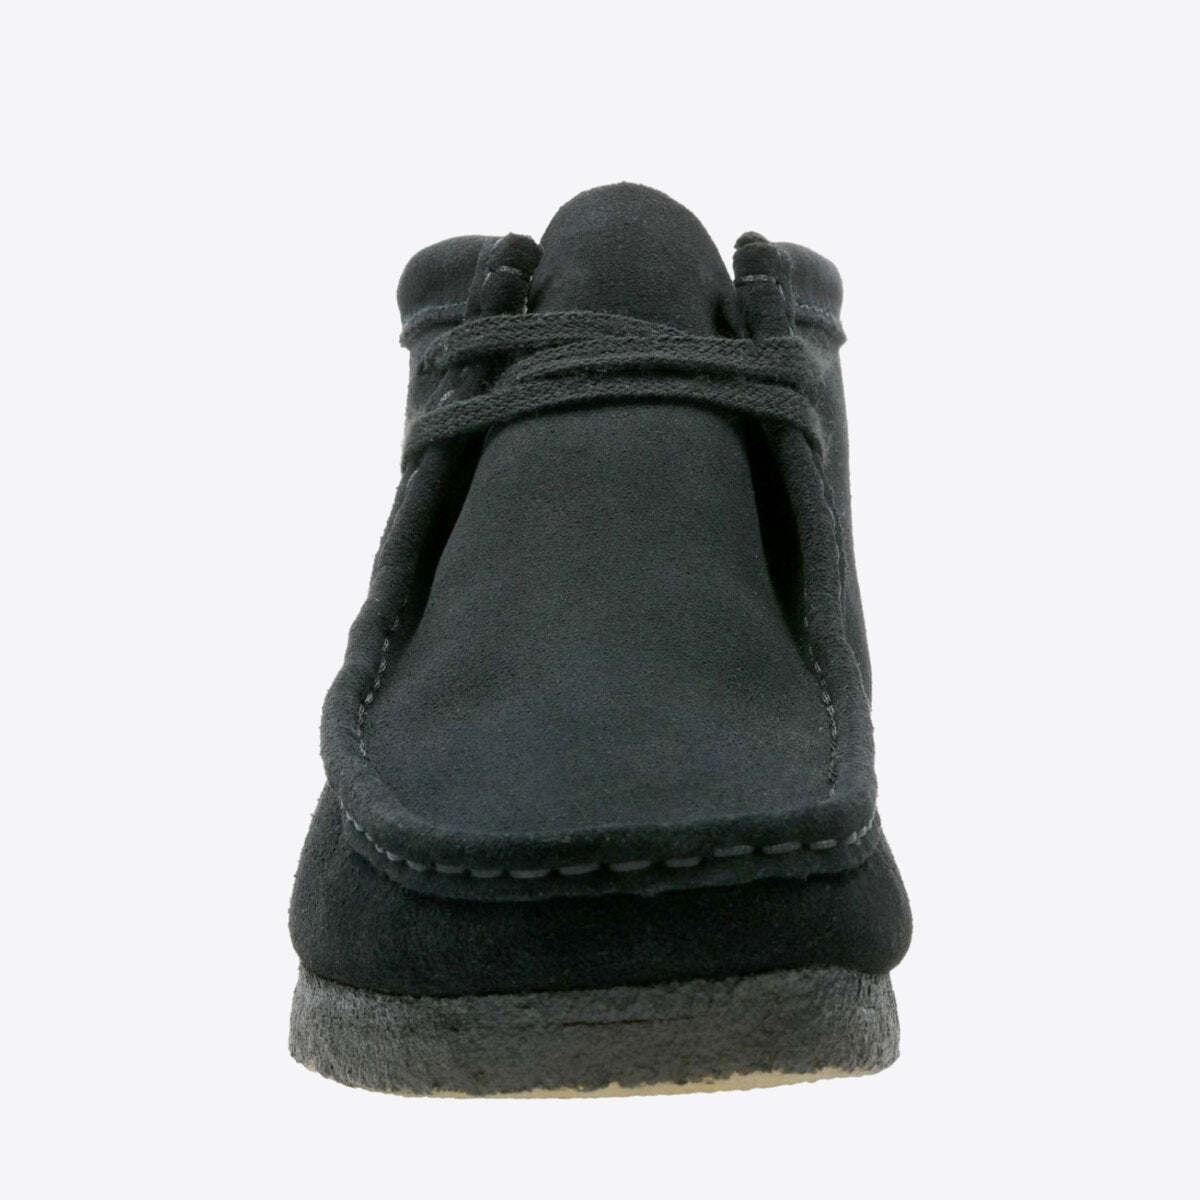 CLARKS Wallabee Boot Suede Black - Image 3